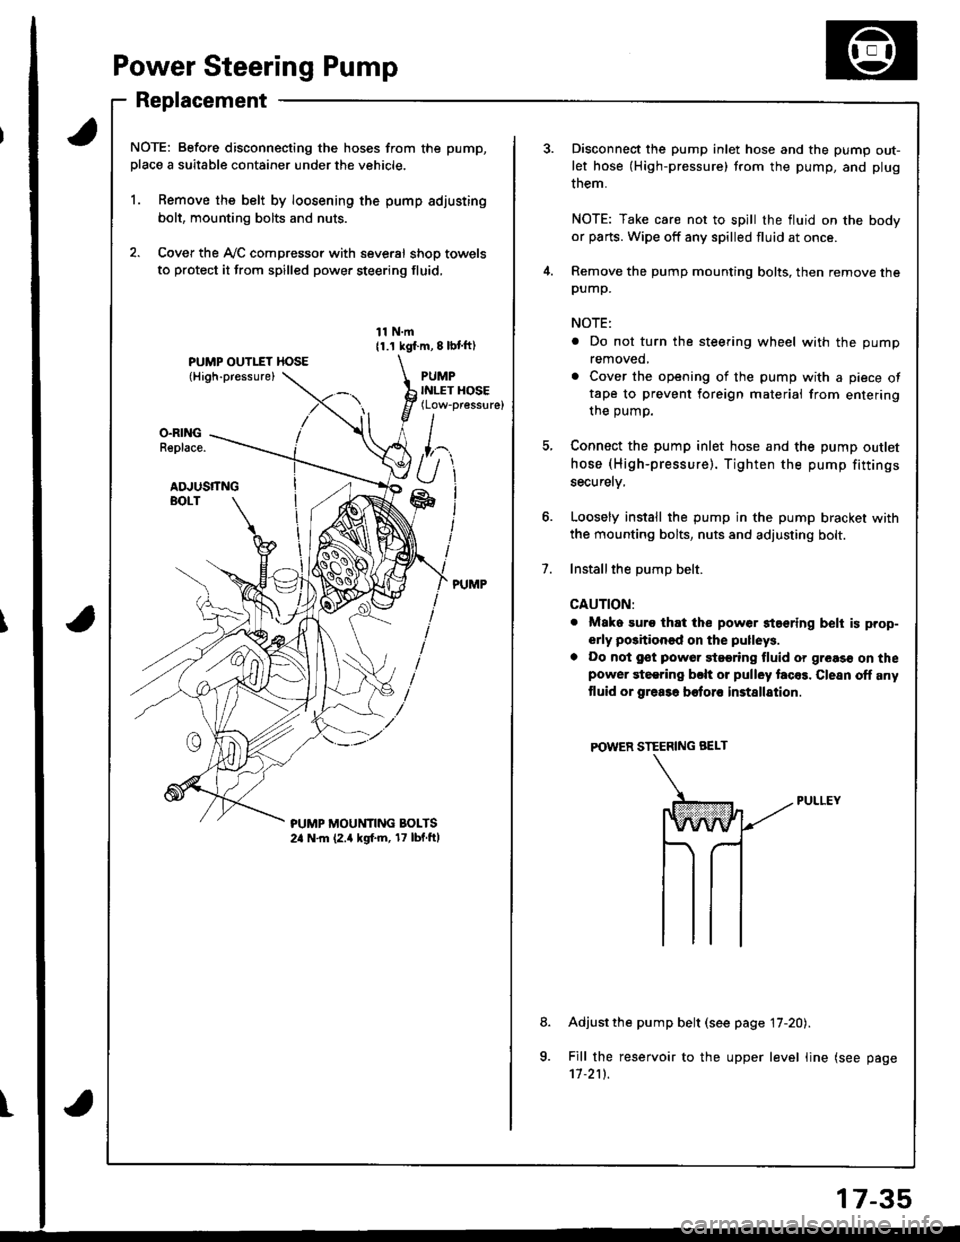 HONDA INTEGRA 1998 4.G Workshop Manual Power Steering Pump
Replacement
NOTE: Before disconnecting the hoses from the pump,
place a suitable container under the vehicle.
1. Remove the belt by loosening the pump adjusting
bolt, mounting bolt